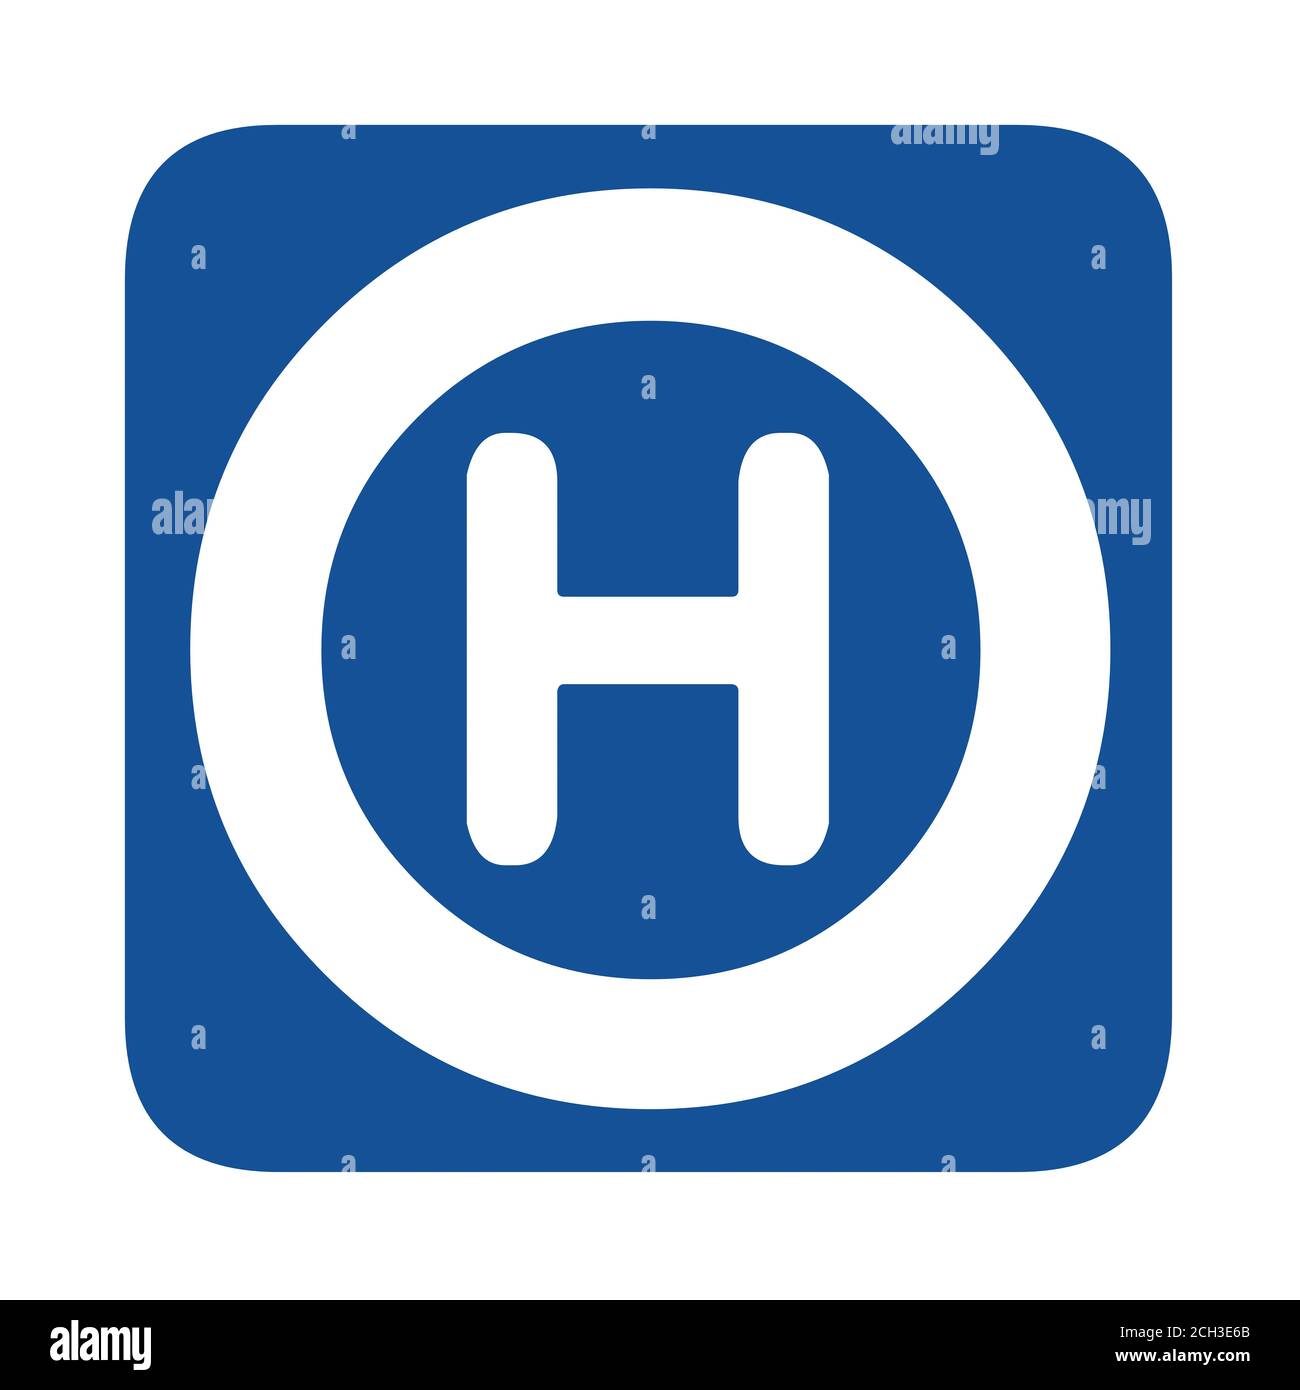 Hospital symbol pictogram in a circle Stock Photo